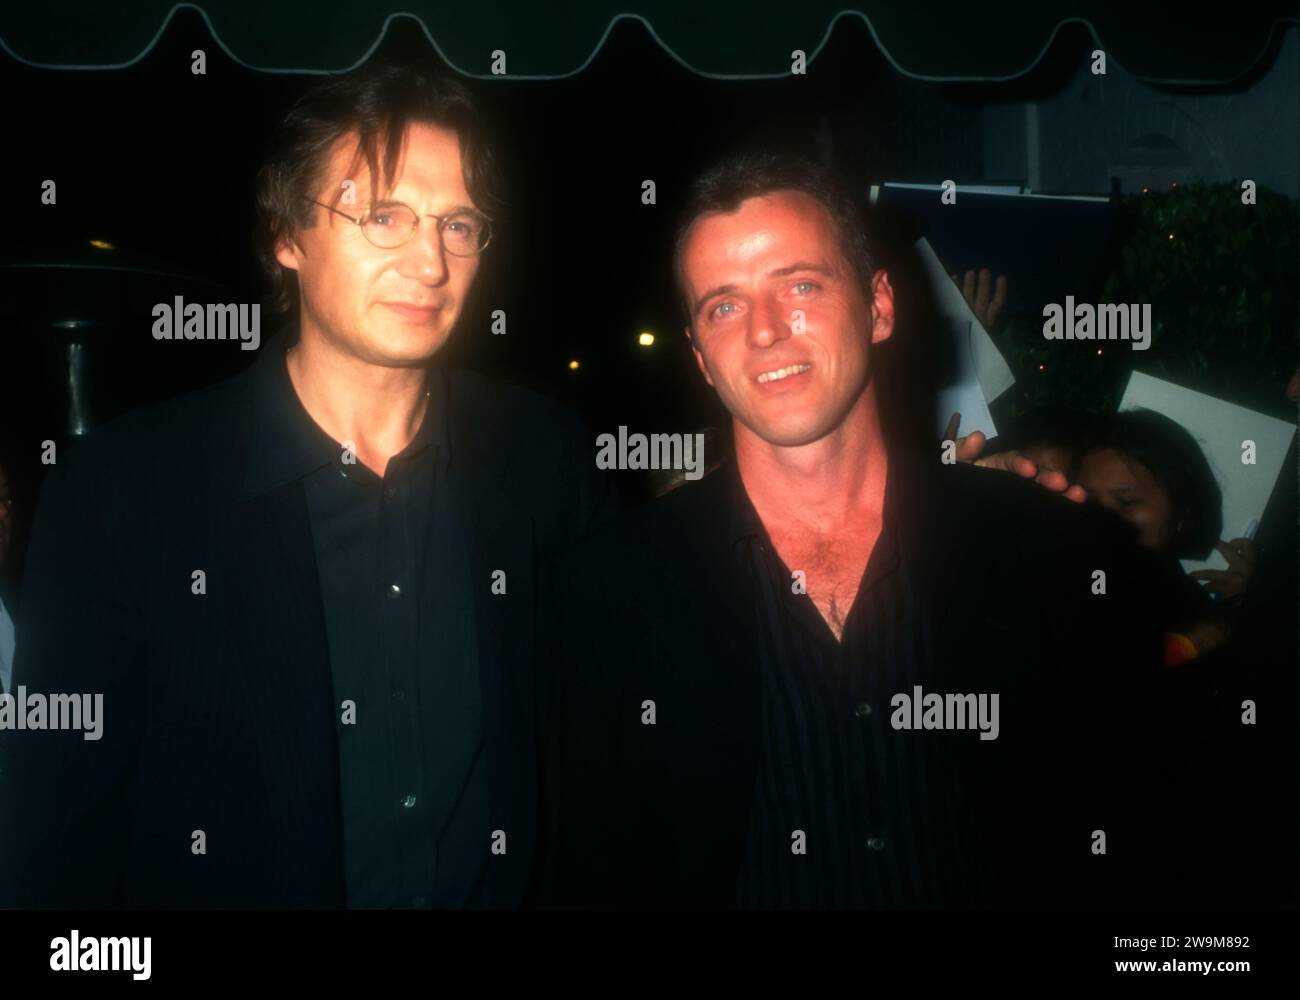 Los Angeles, California, USA 8th October 1996 Actor Liam Neeson and Actor Aidan Quinn attend Warner Bros. ÔMichael CollinsÕ Party at ChasenÕs Restaurant on October 8, 1996 in Los Angeles, California, USA. Photo by Barry King/Alamy Stock Photo Stock Photo